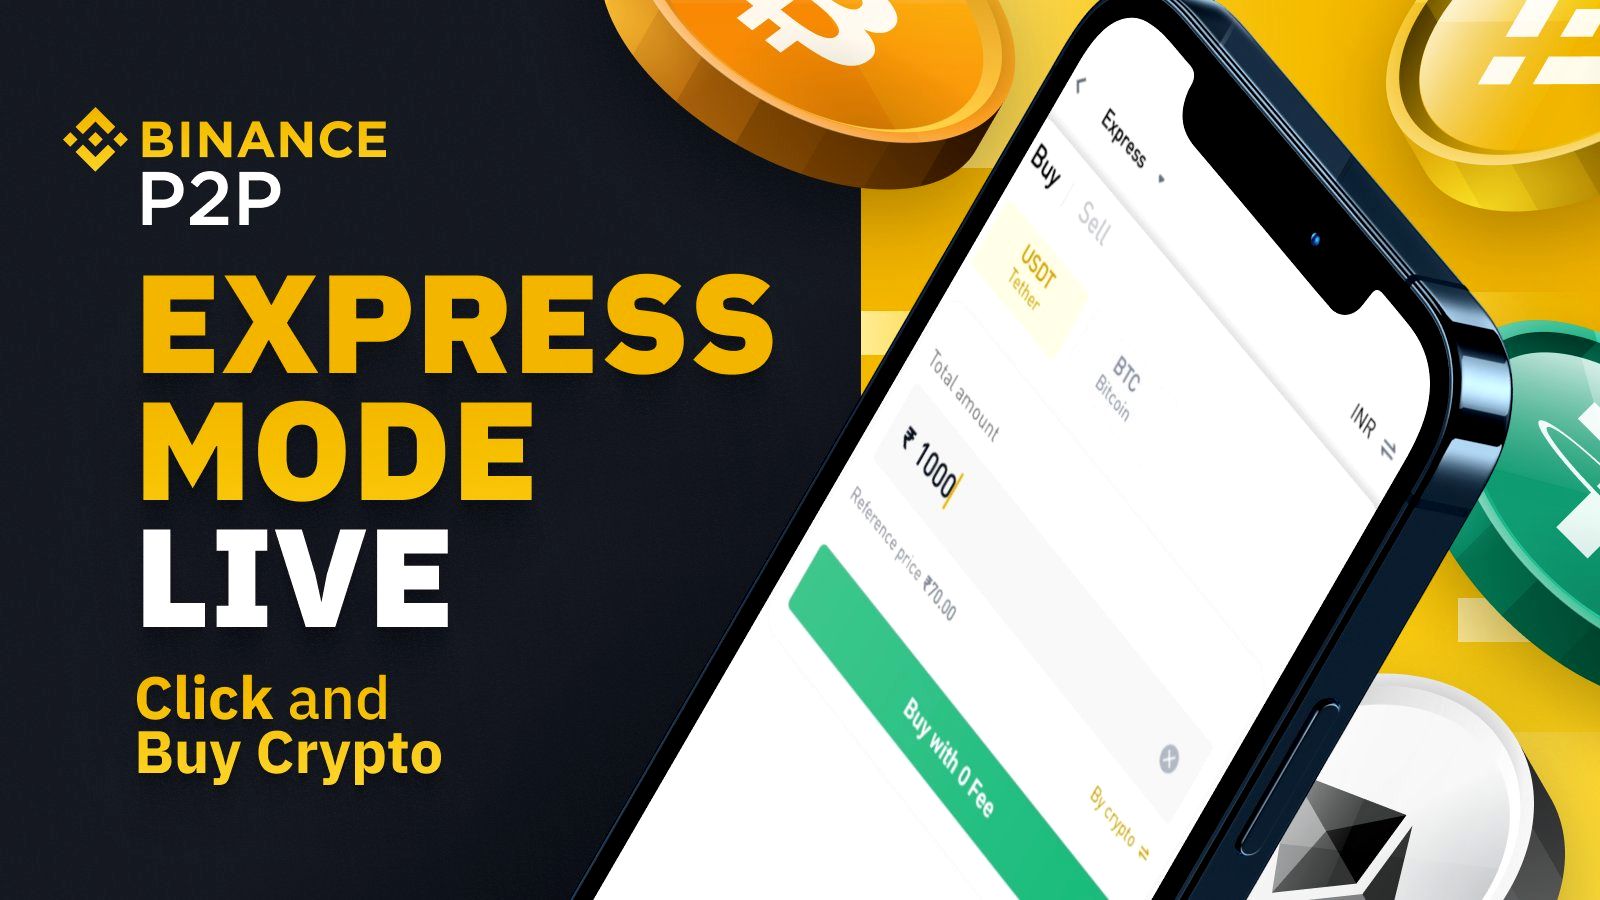 [WATCH] Binance P2P Adds an Express Mode to Buy and Sell ...